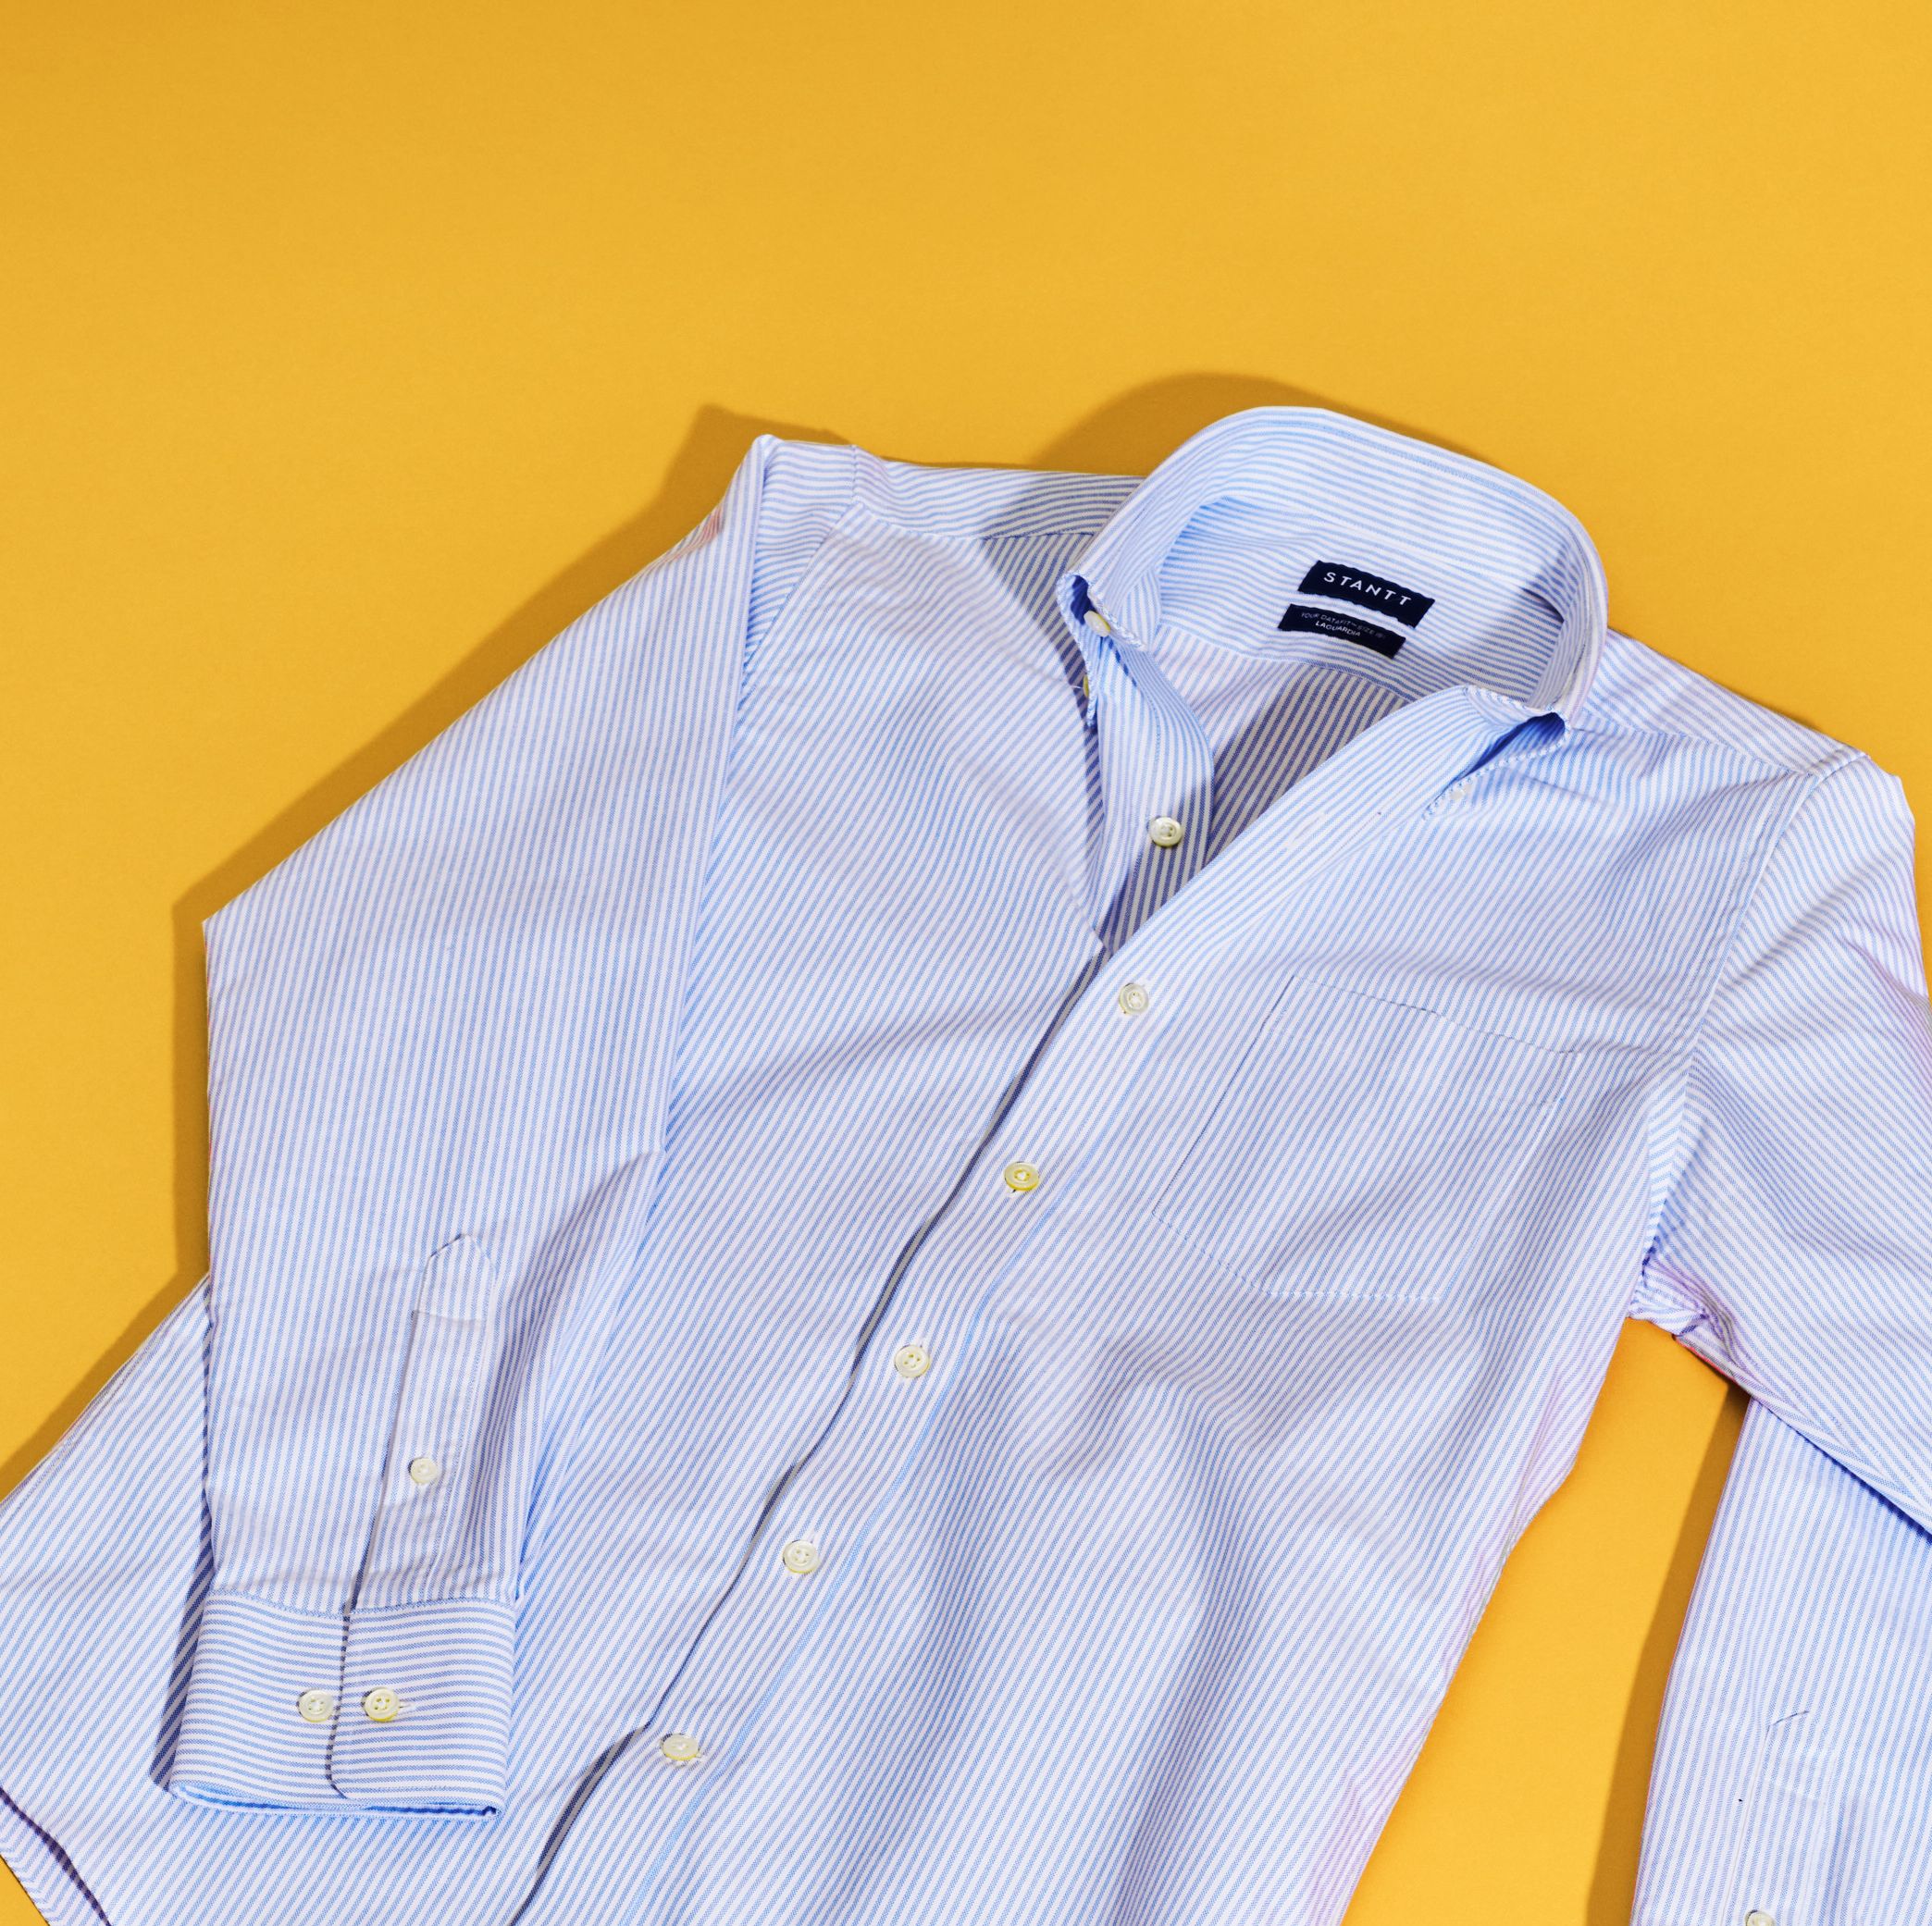 The Made-to-Measure Shirt Brand That Makes It Oh So Easy